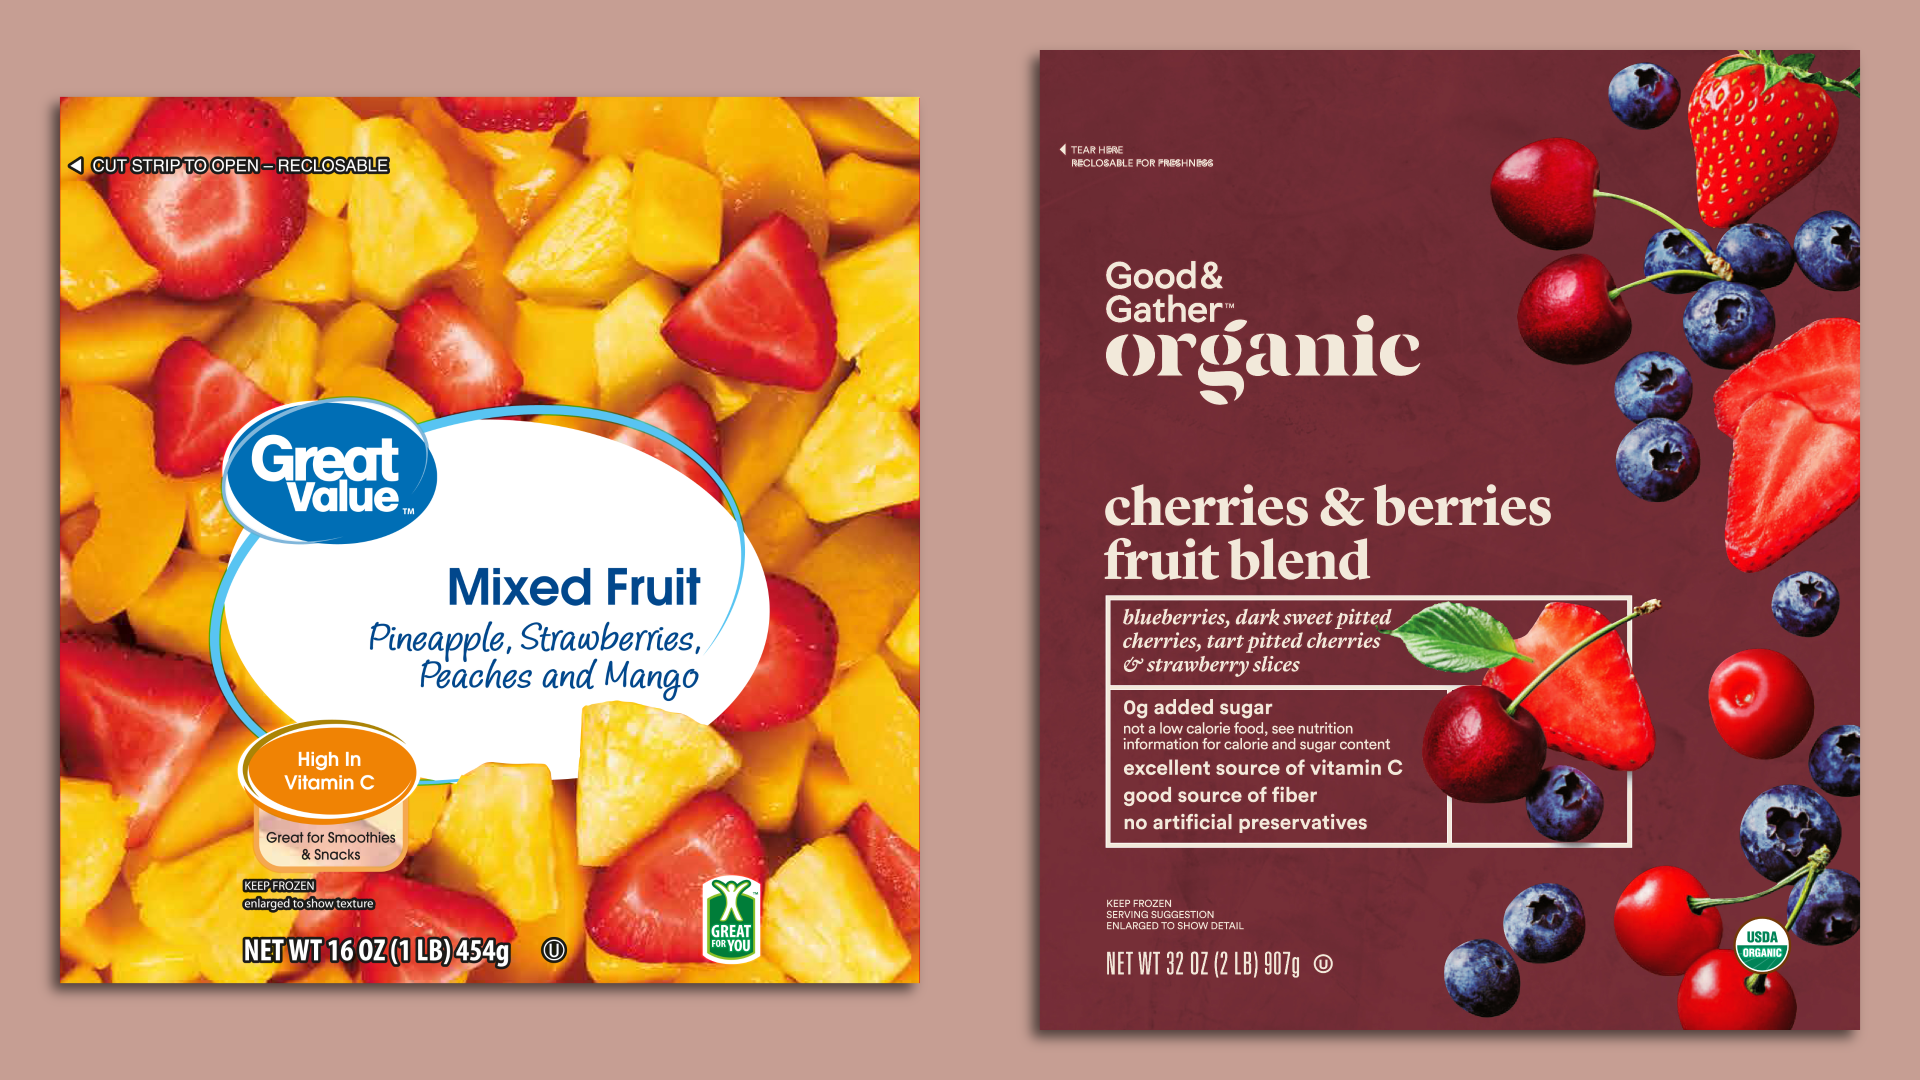 Image of a Great Value  bag of Mixed fruit next to a Good&Gather organic cherries & berries fruit blend on a light red background